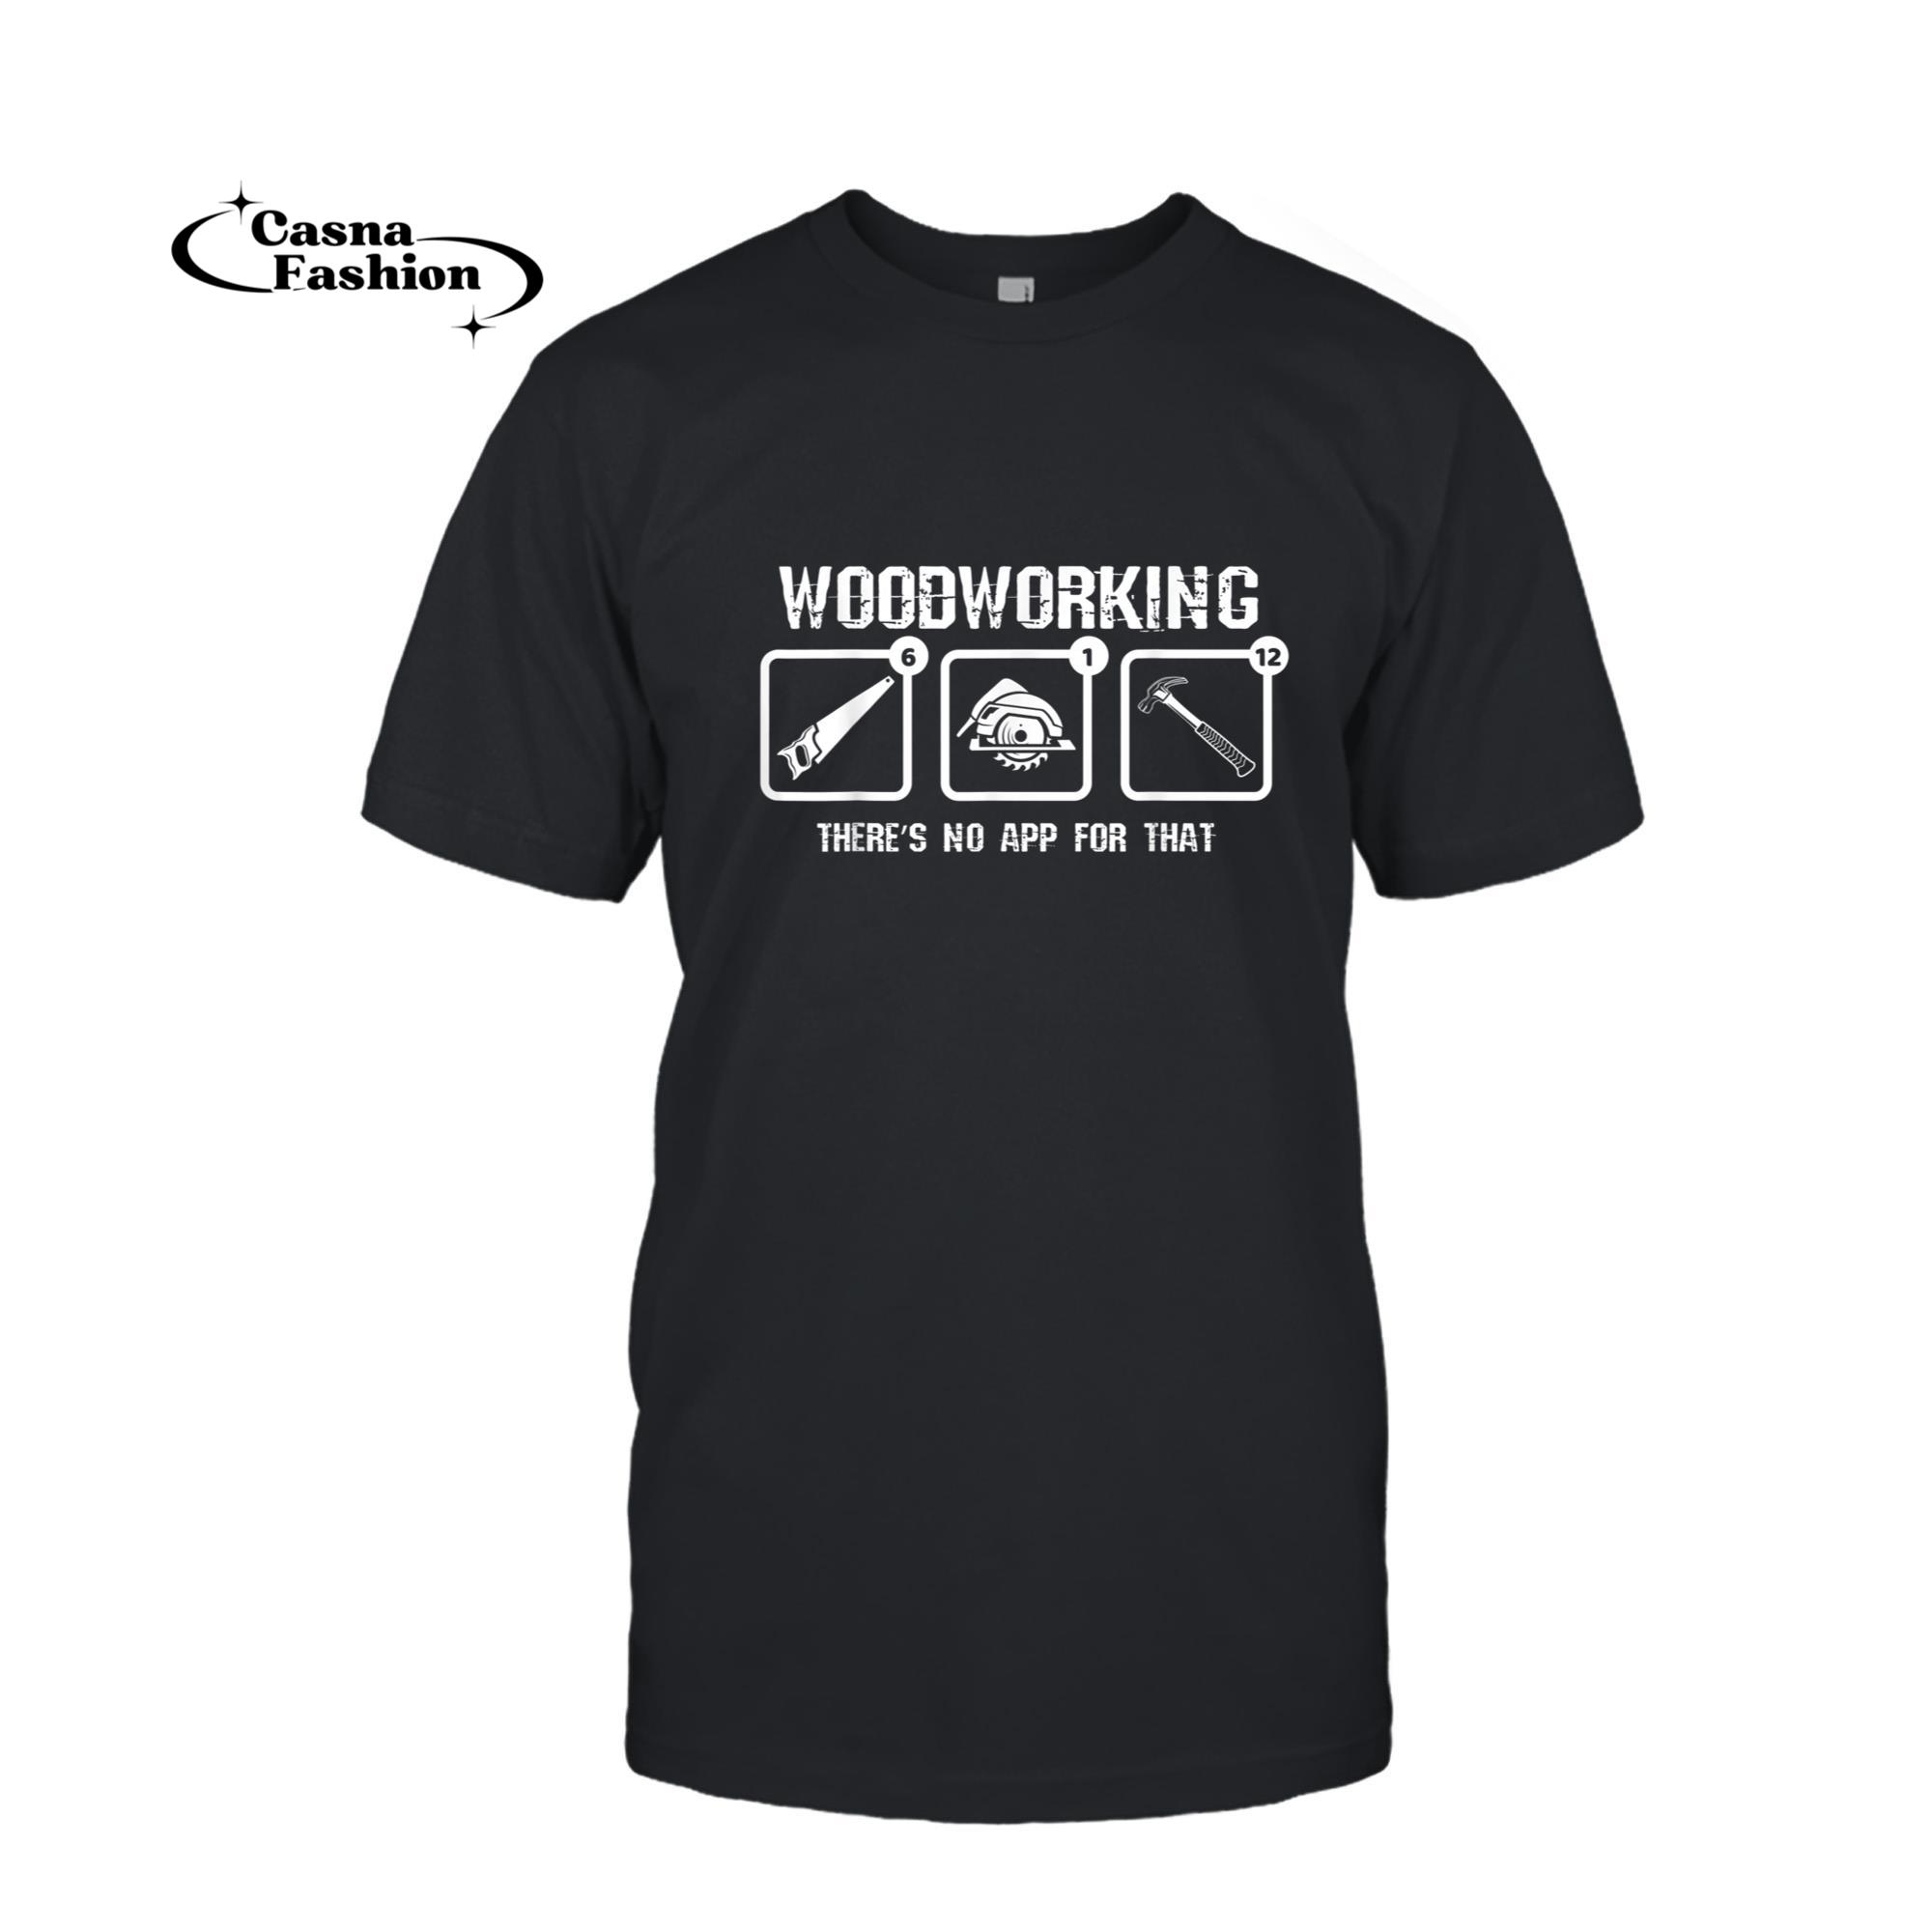 casnafashion_T-shirt_Woodworking There's No App For That - Shirt Carpenter_T-shirt_Black